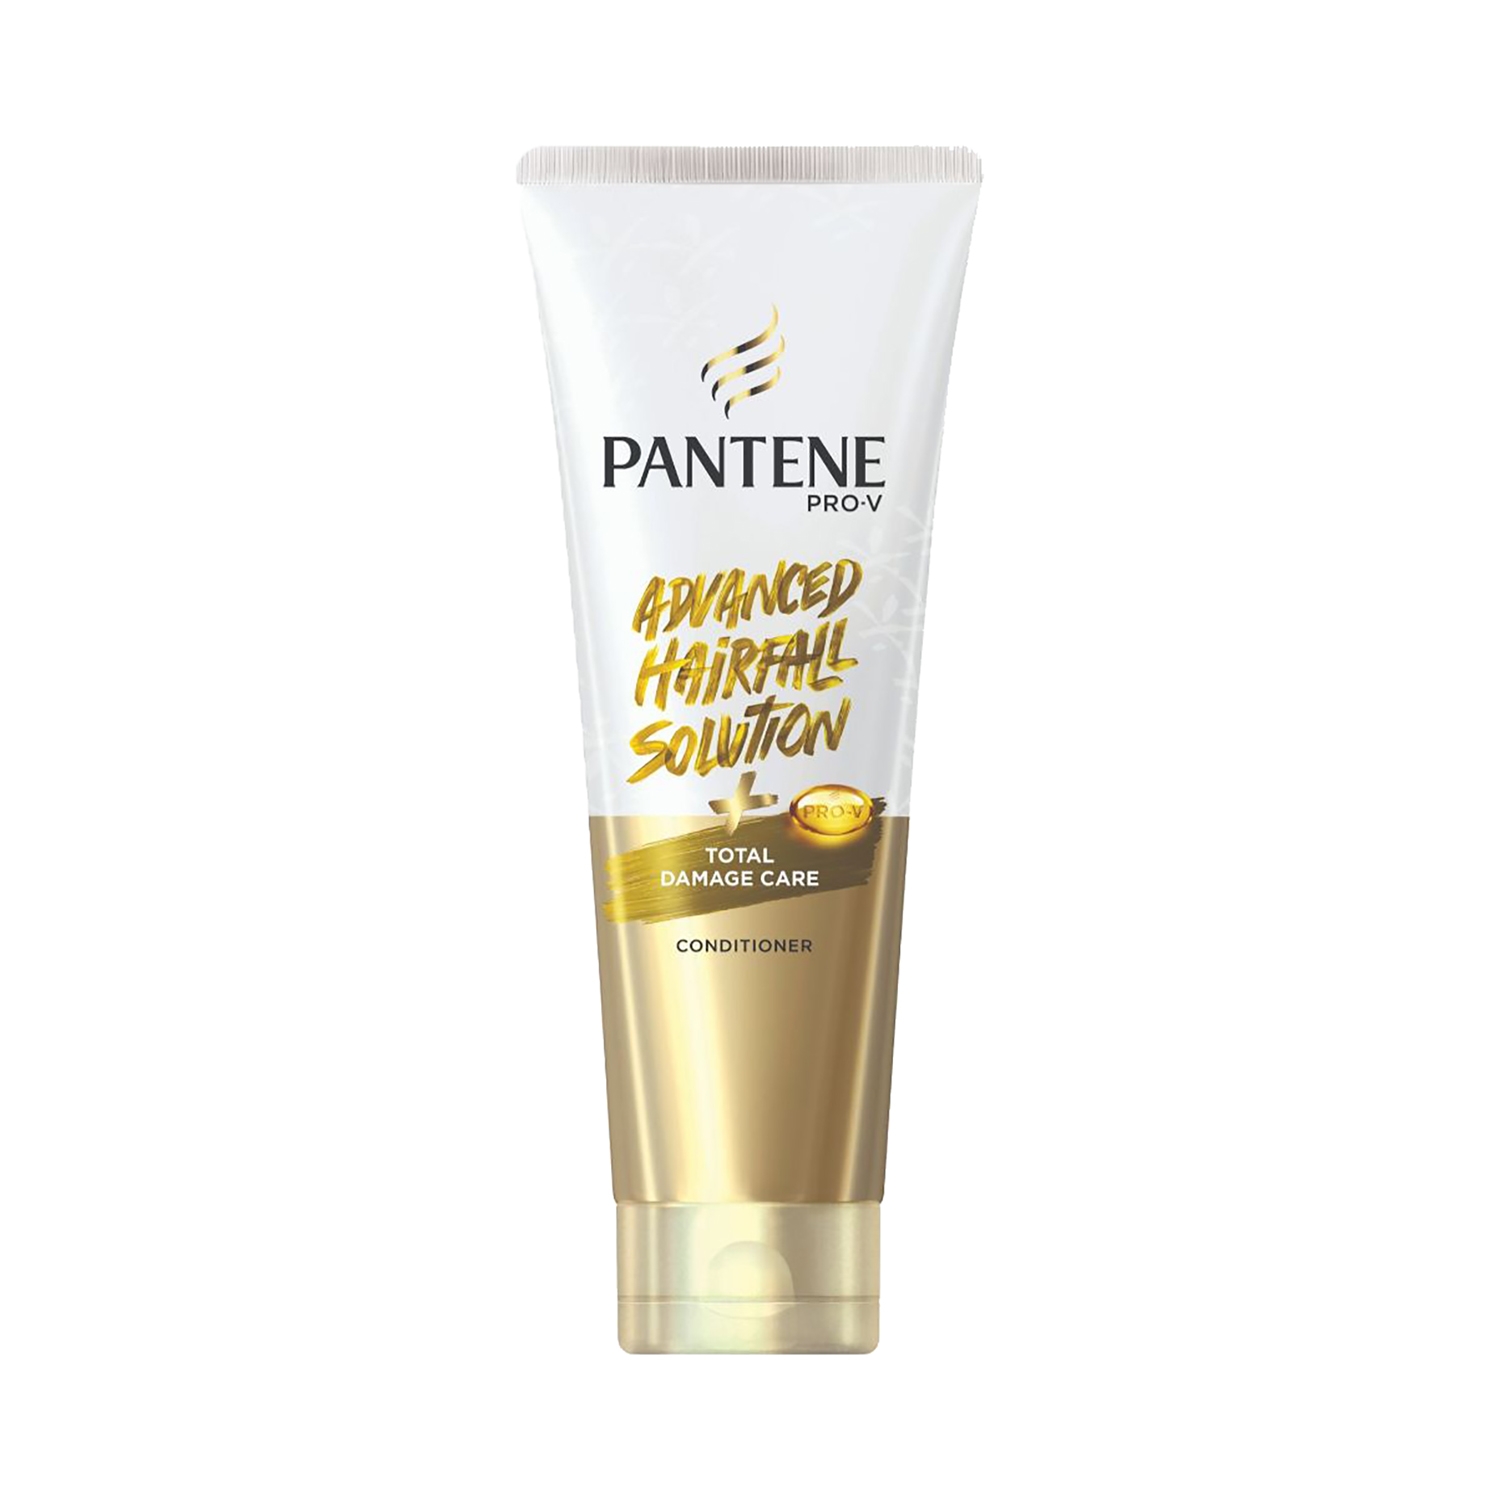 Pantene Advanced Hairfall Solution Anti-Hairfall Total Damage Care Conditioner (180ml)